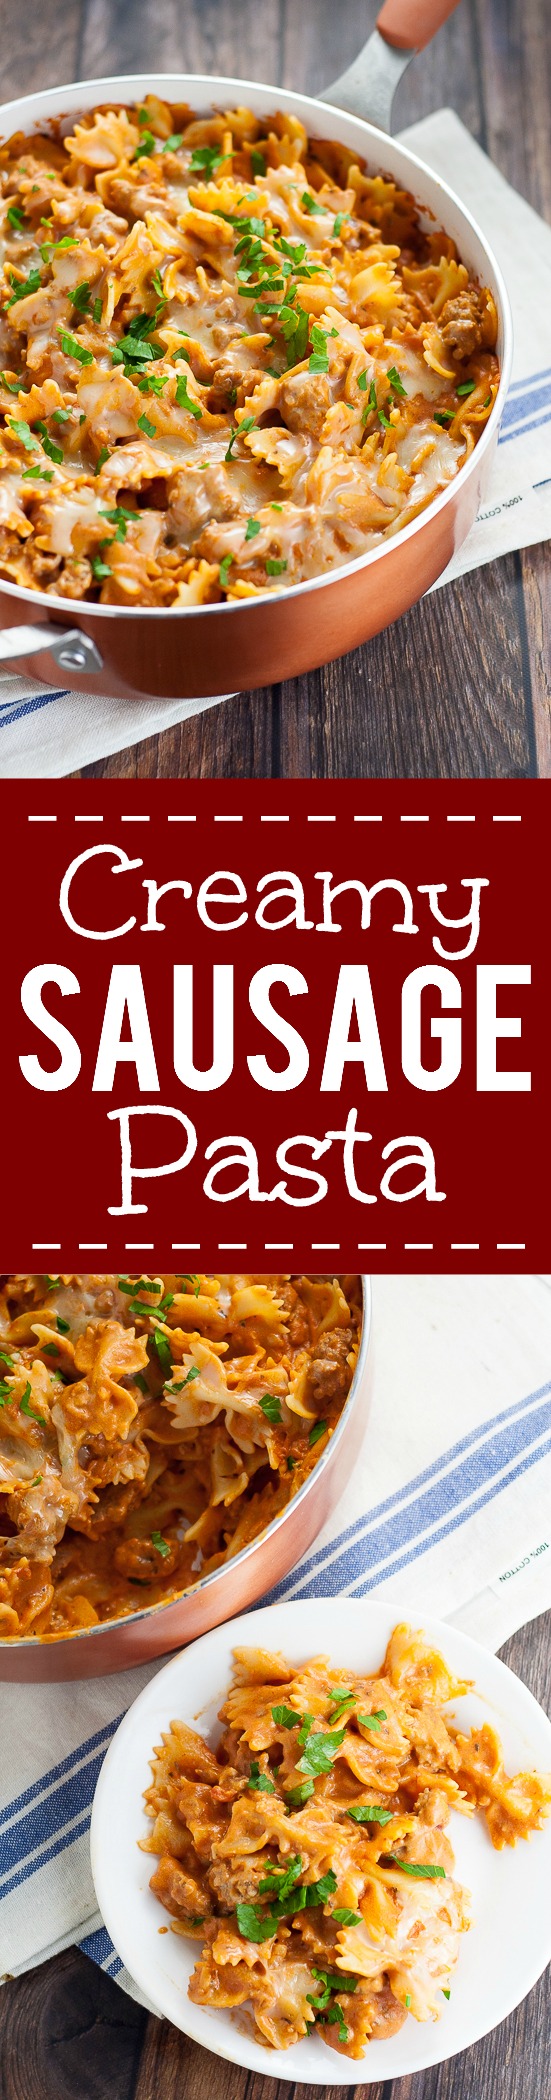 Creamy Sausage Pasta recipe - This Creamy Sausage Pasta recipe is simple, cheesy, and perfect for an easy family dinner recipe with a creamy red sauce, Italian sausage, and melted gooey cheese. Super easy pasta for family dinner recipe and can be made in just 30 minutes! 